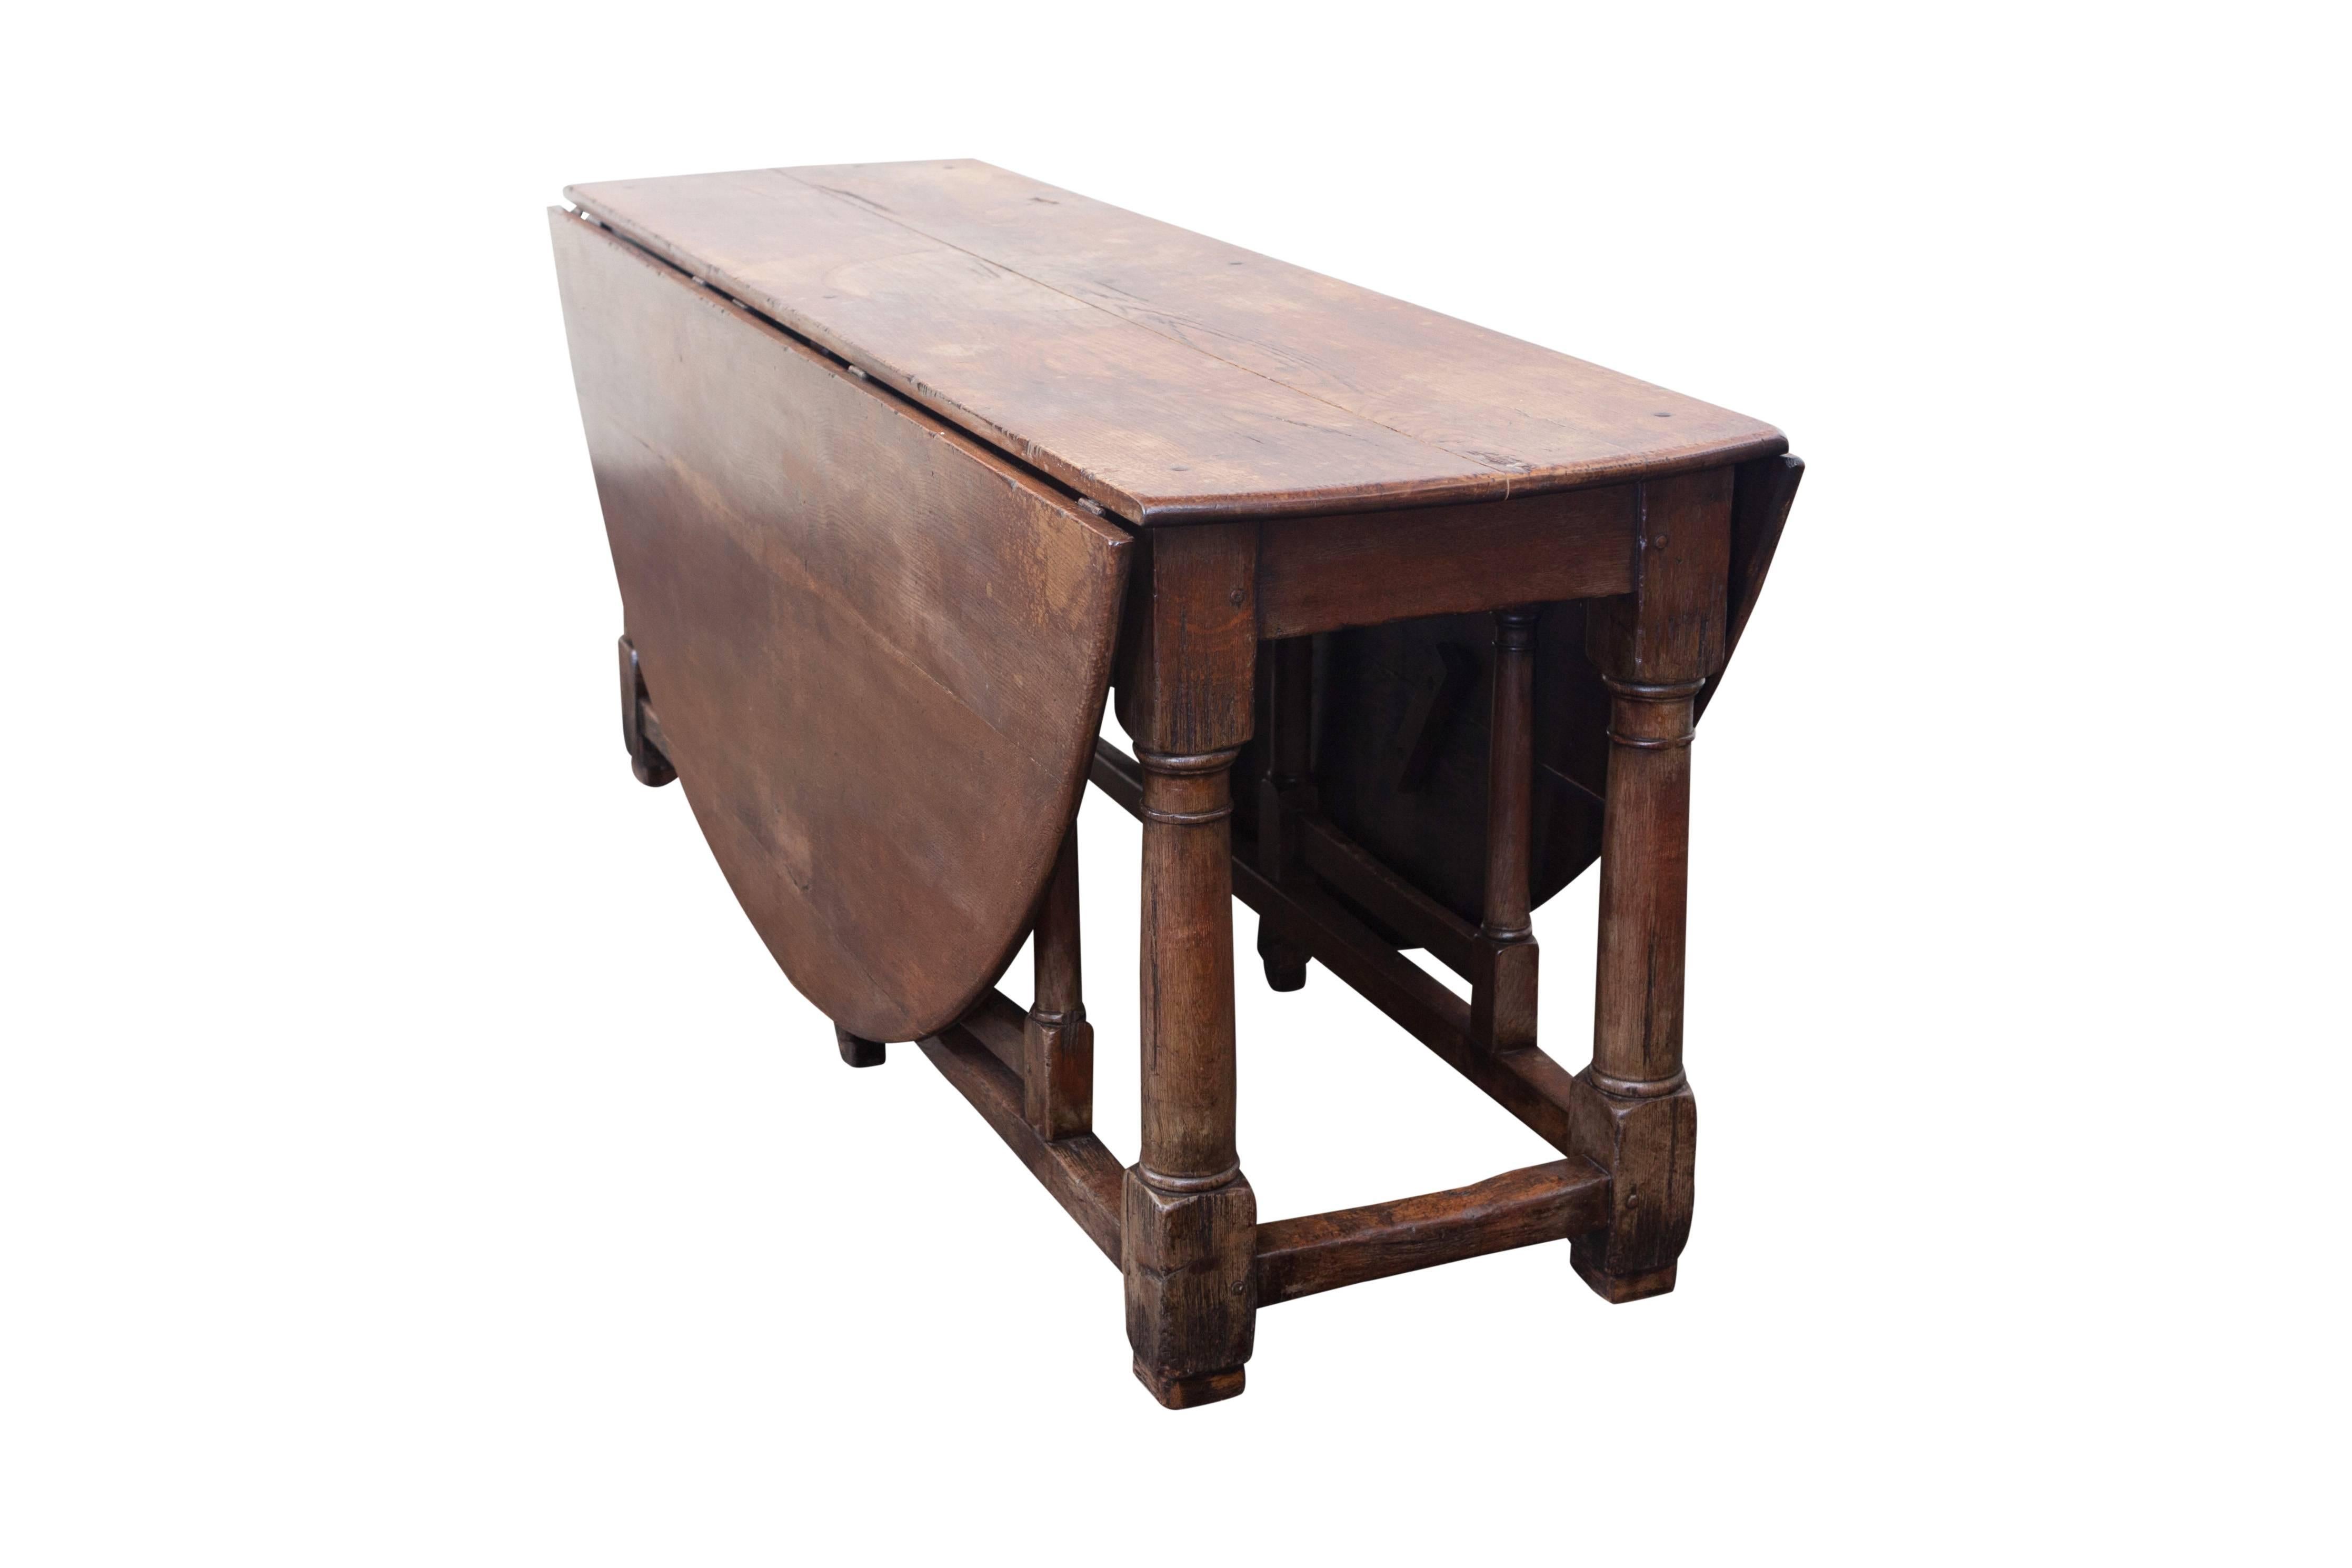 Large English dinging table in oak with drop leaves that open to a round top.
The carved legs and the patina gives this table a beautiful rustic look.

Drop leave tables had an extra use during hunting season, dropping down the top gave acces for